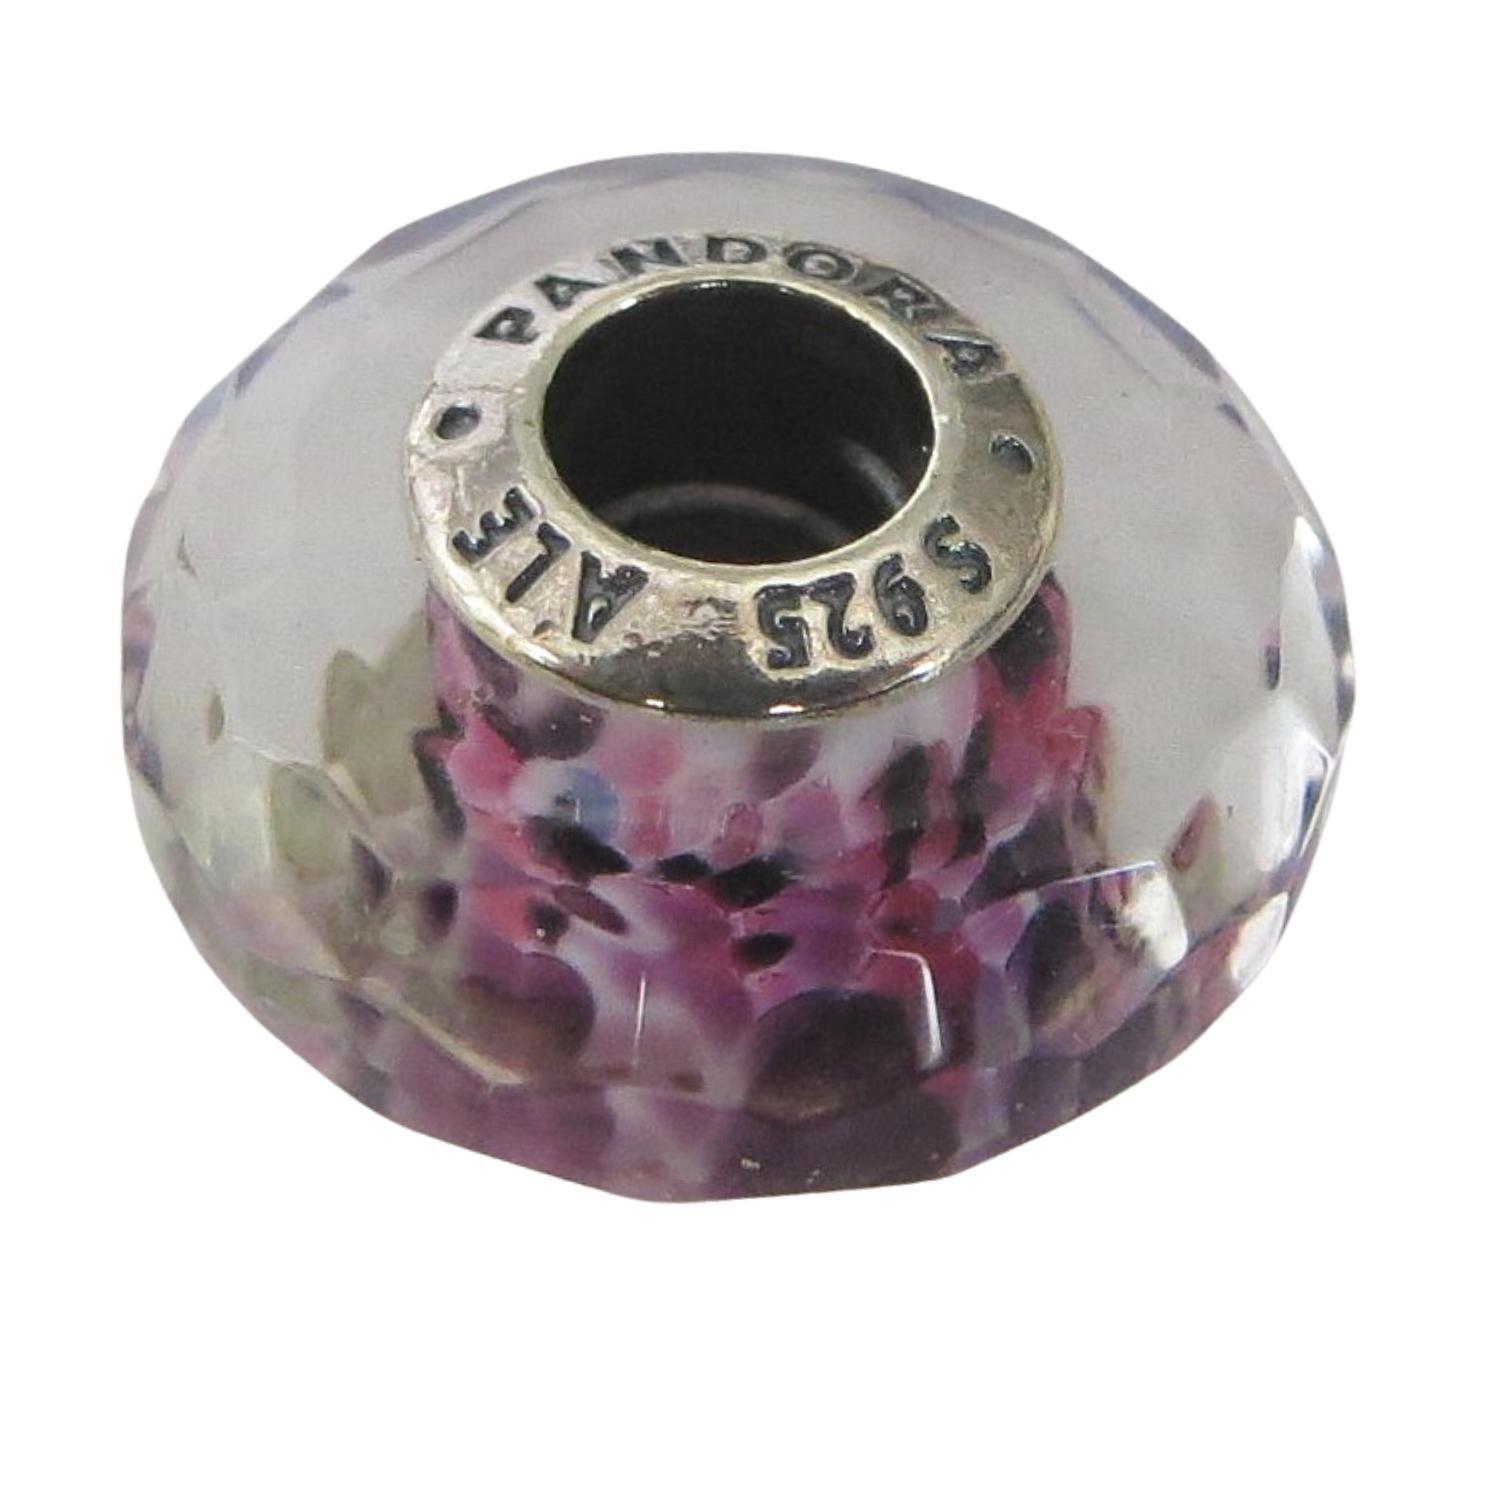 PANDORA 791608 – Murano Glass - Shoreline Sea Glass, Multicolor, Pink, Purple, Seafoam Green, Black Paint Dabs on White Background- Women’s Sterling Silver Round Charm - Charming Jilly